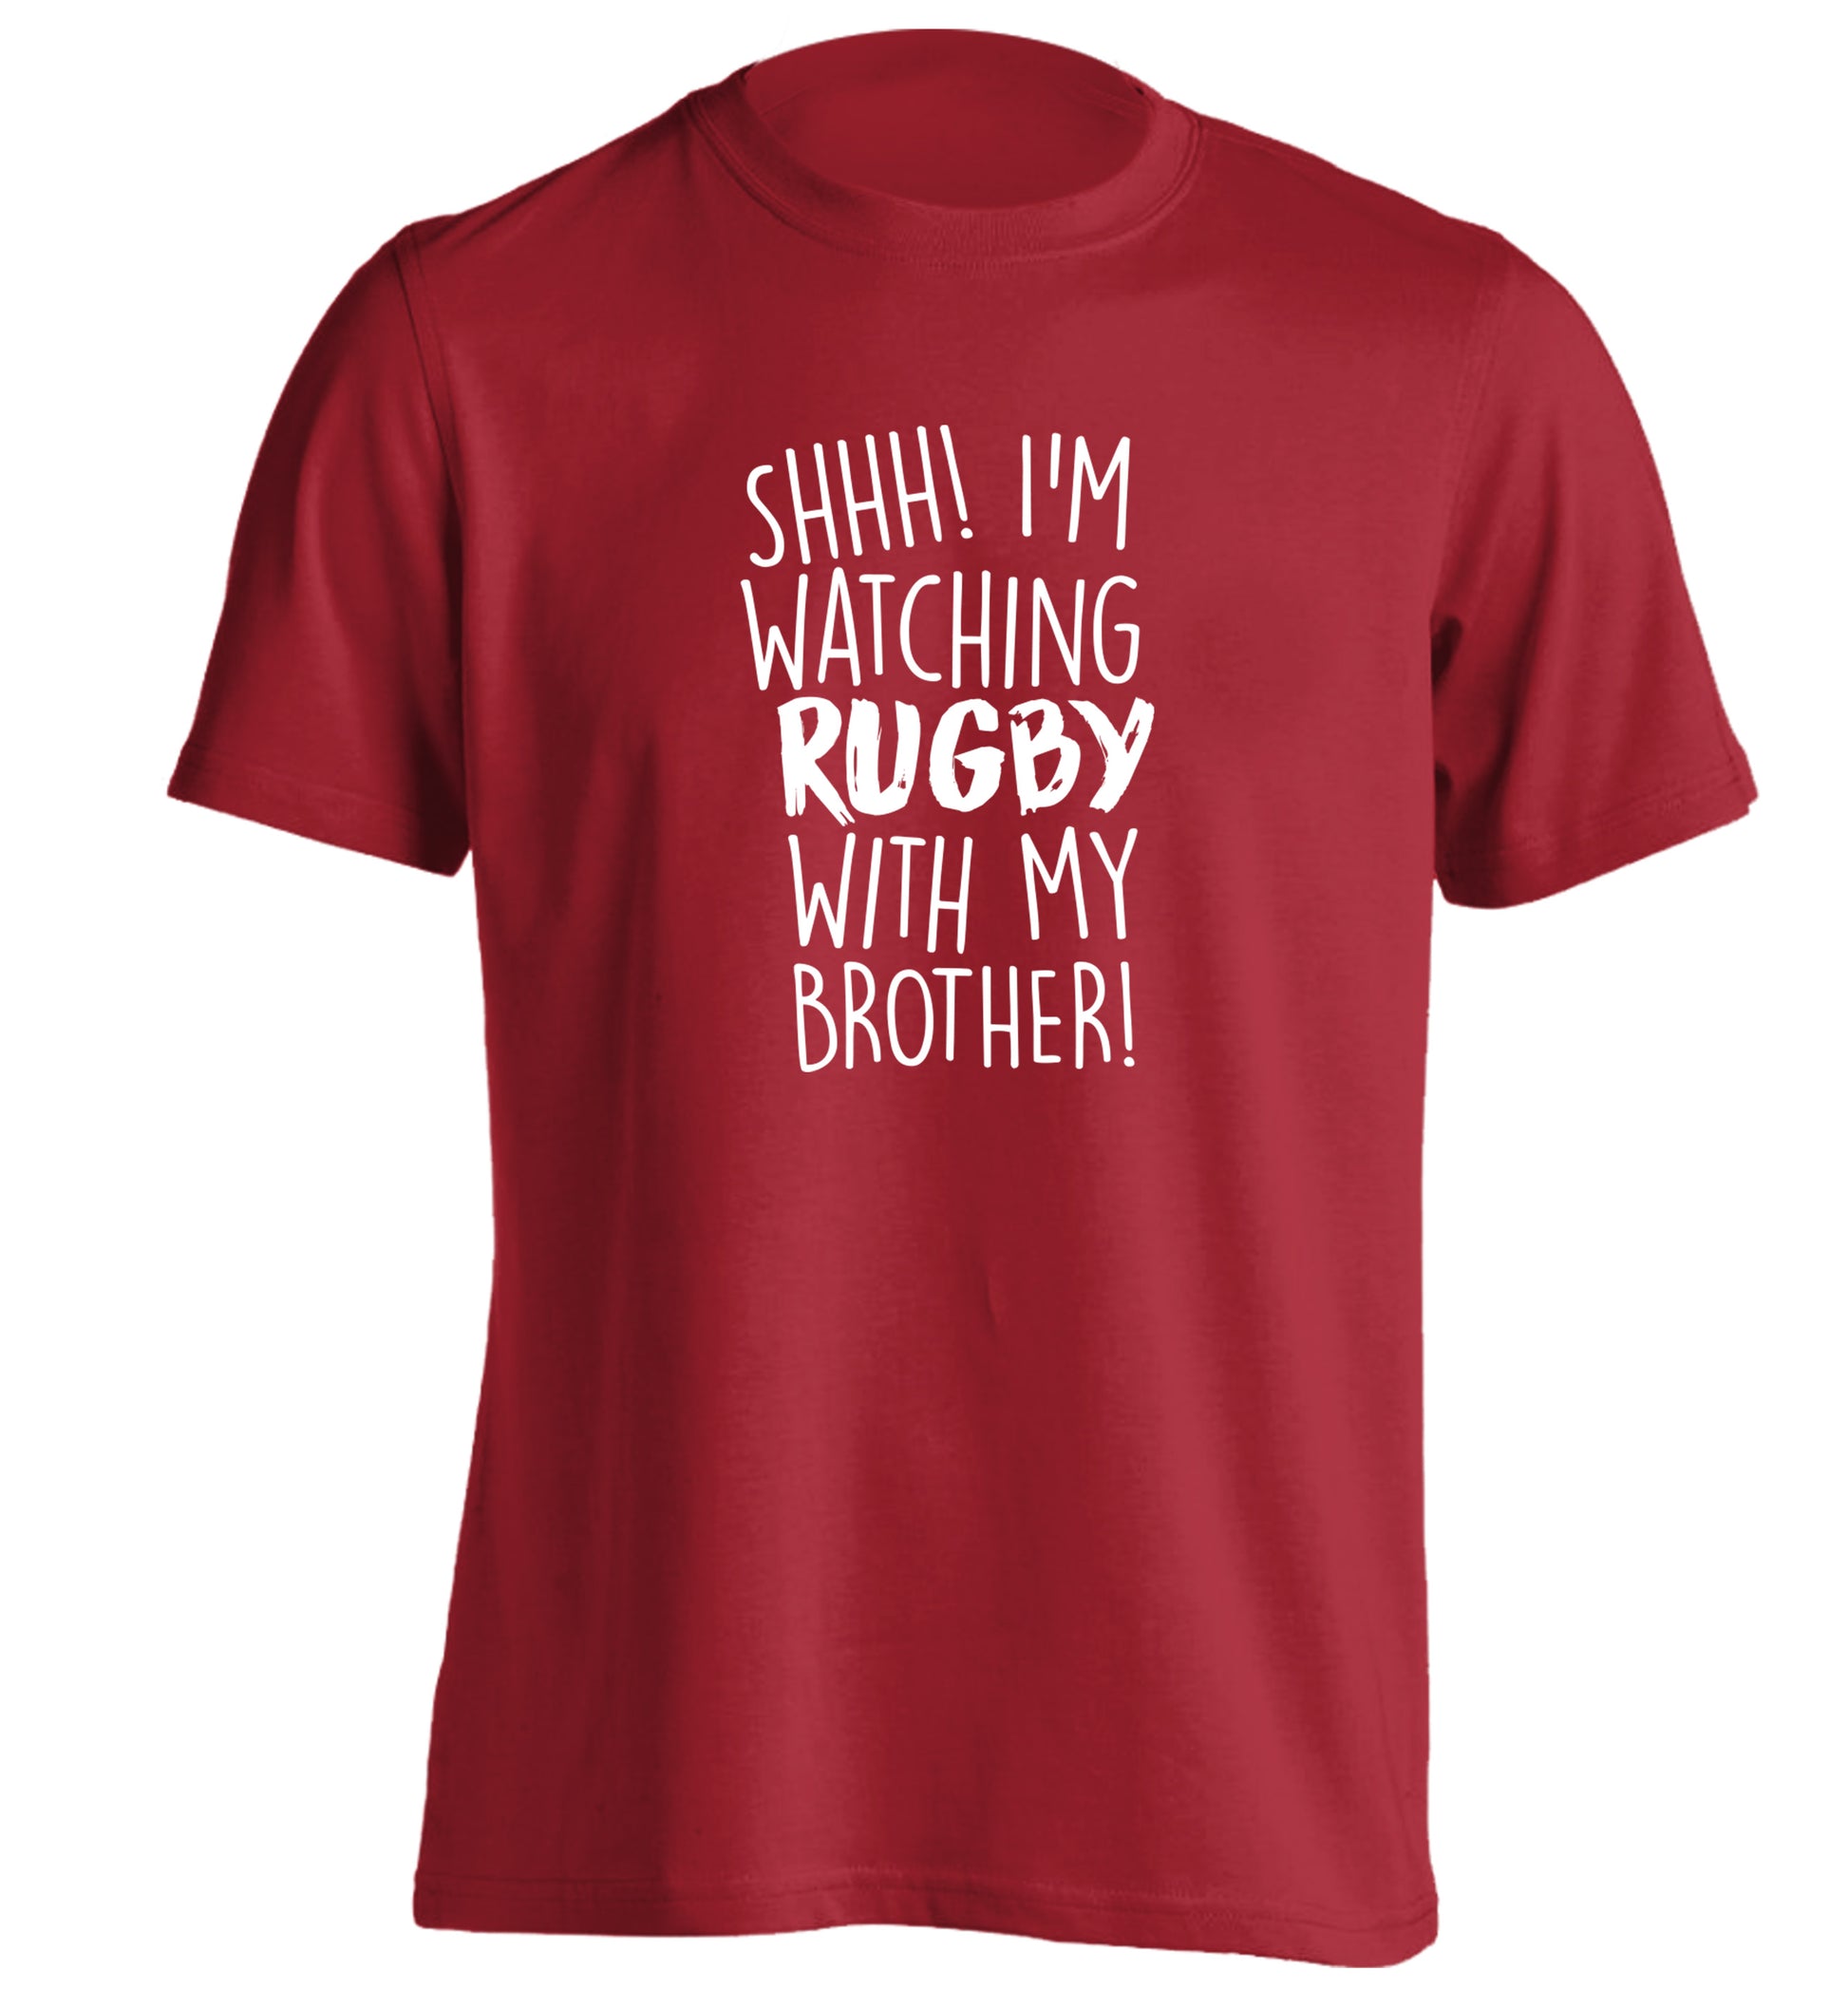 Shh... I'm watching rugby with my brother adults unisex red Tshirt 2XL